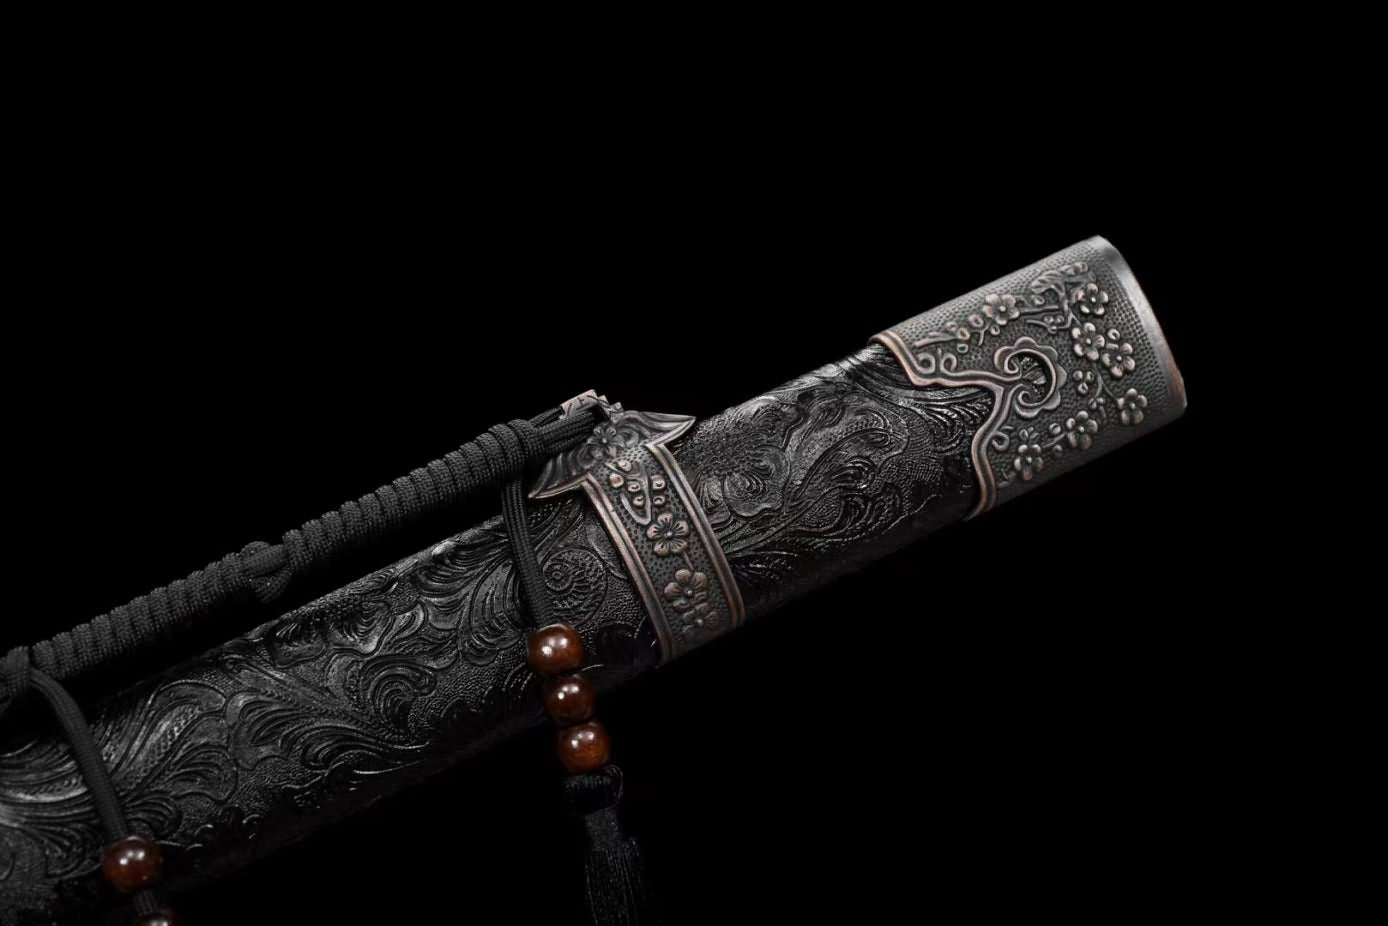 Qing dao Swords Real Forged High Carbon Steel Blade,Alloy Fittings,LOONGSWORD